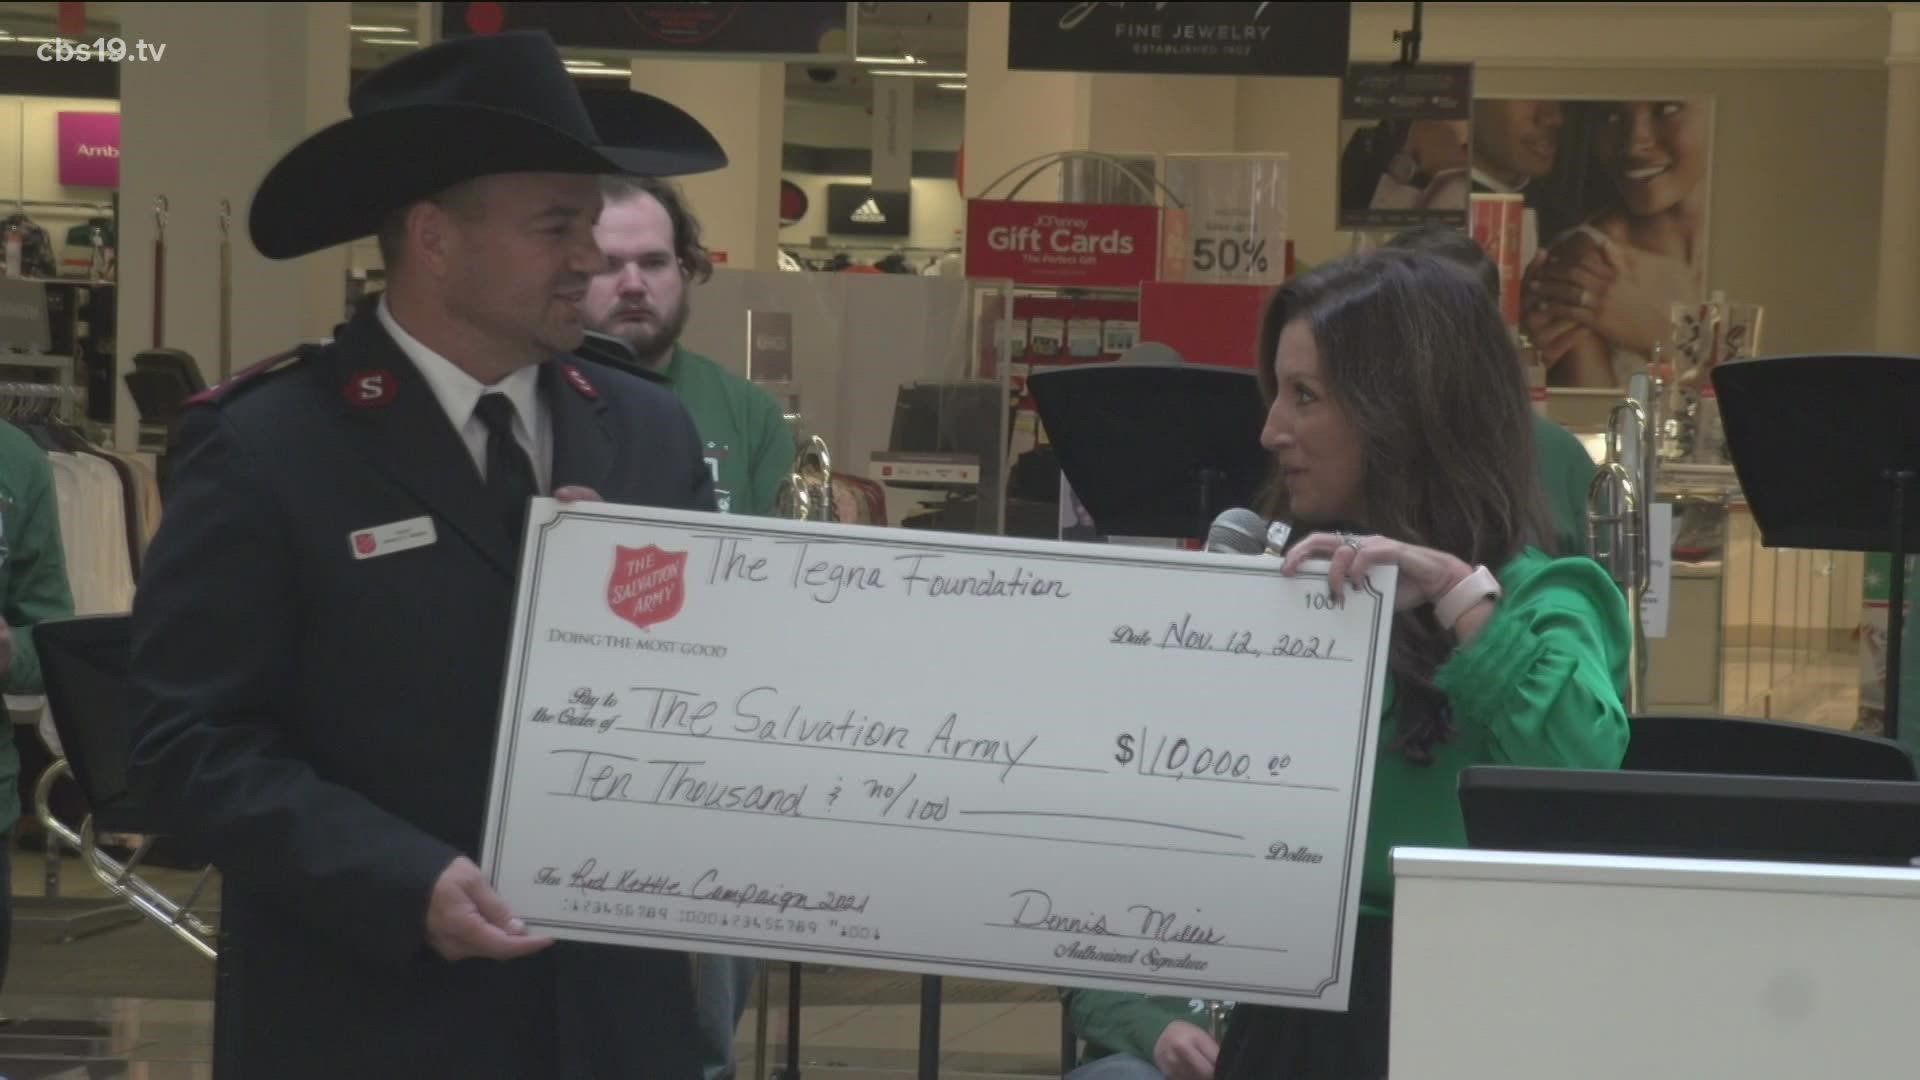 To register to ring the bell at one of their locations, visit their website: https://www.salvationarmytexas.org/tyler/